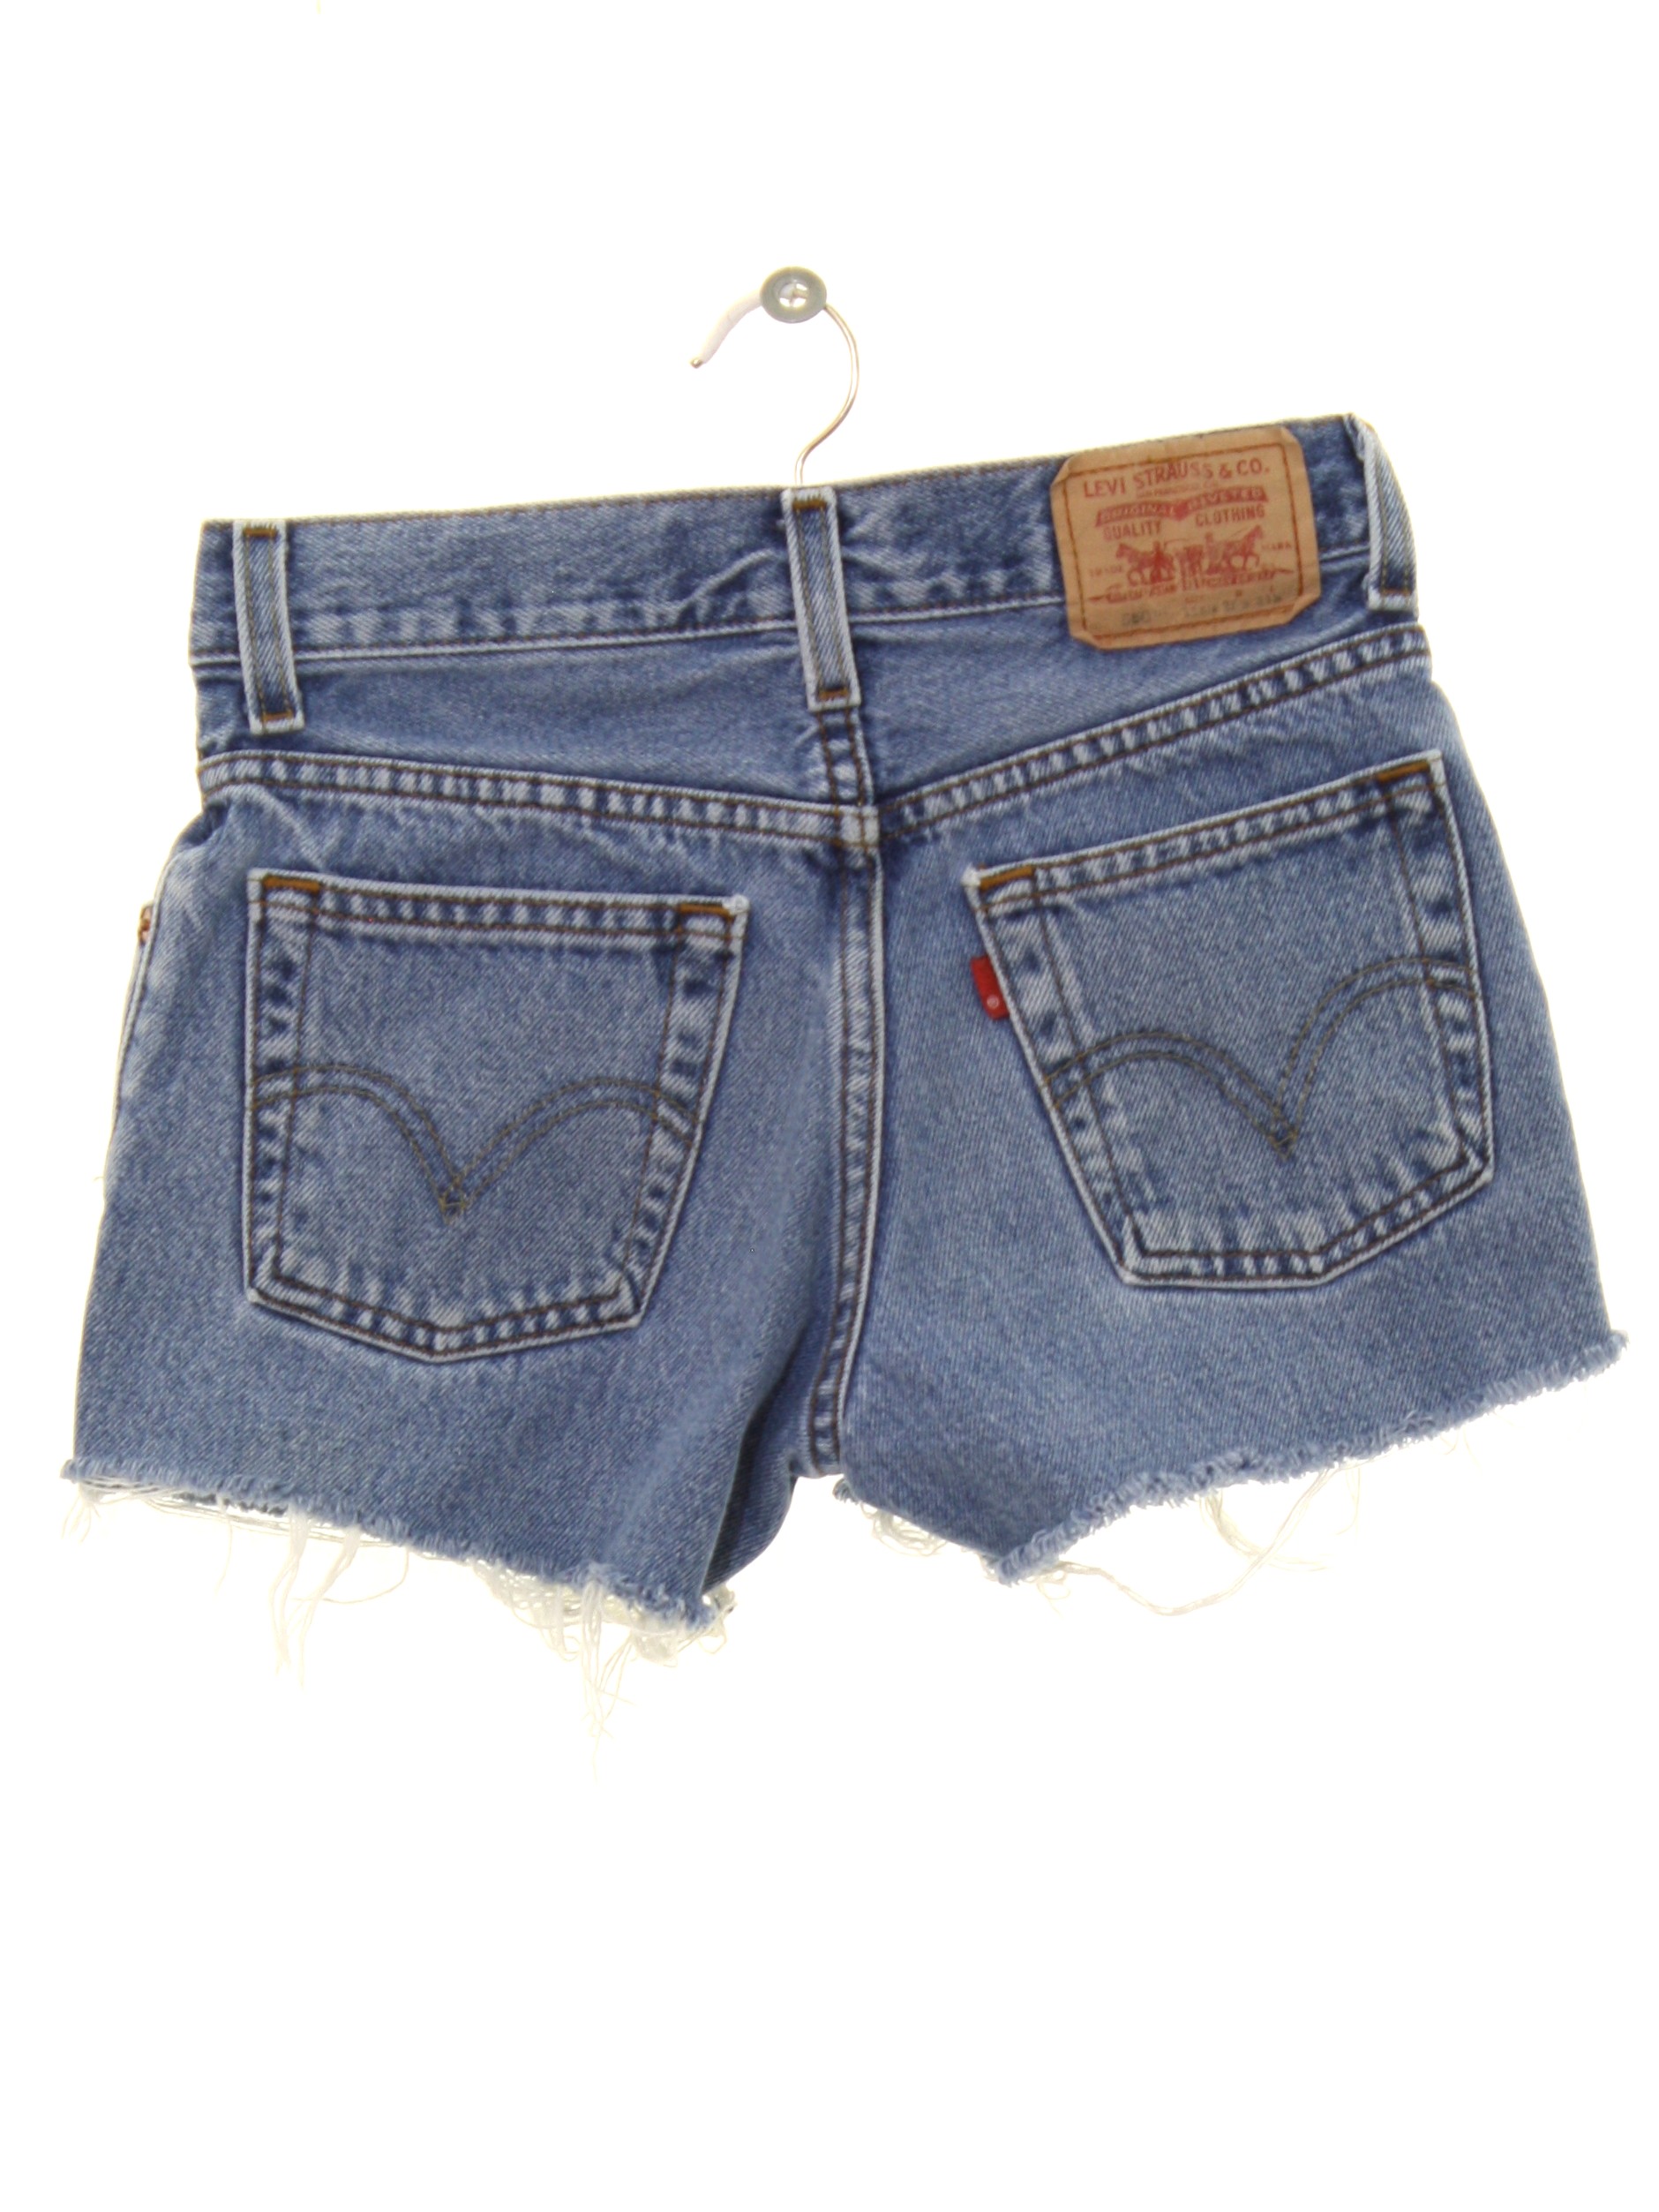 90s Retro Shorts: Late 90s -Levis 550- Womens/Girls light faded blue wash  cotton cutoff denim Levis 550 shorts. Classic 5 pocket style, standard size  belt loops, and zipper fly closure with button.